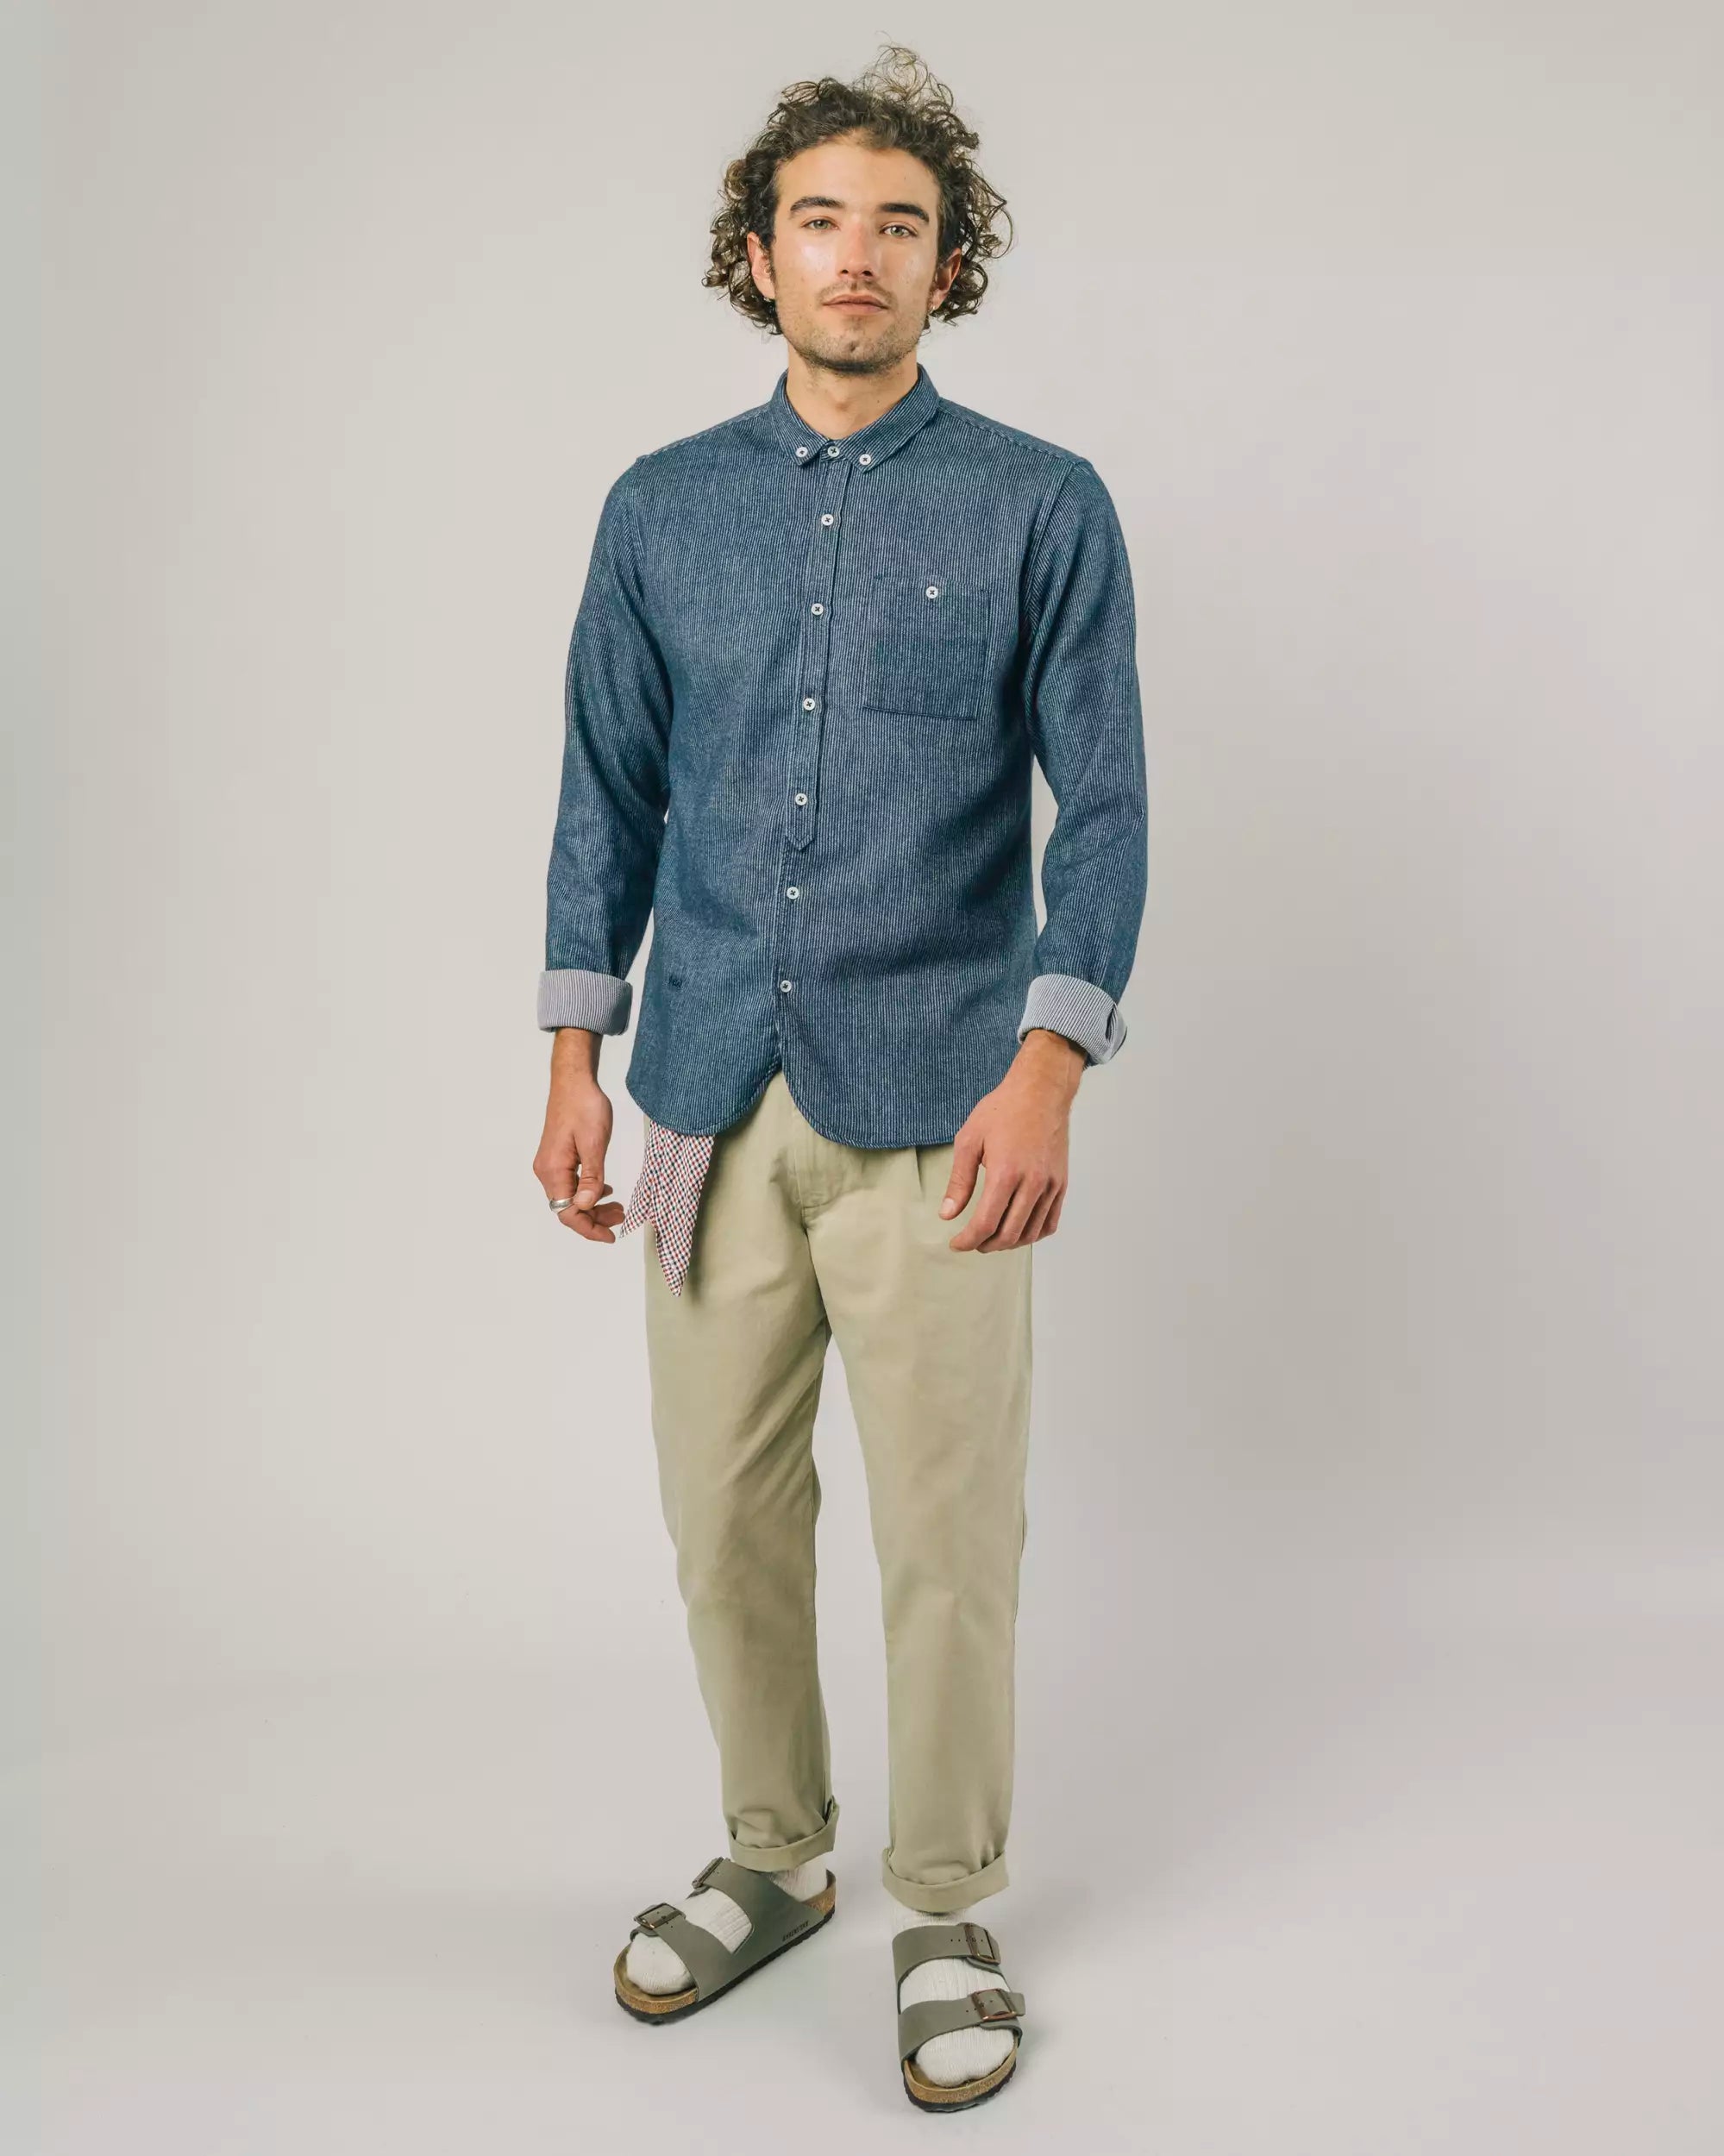 Two Tones Flannel Shirt Navy